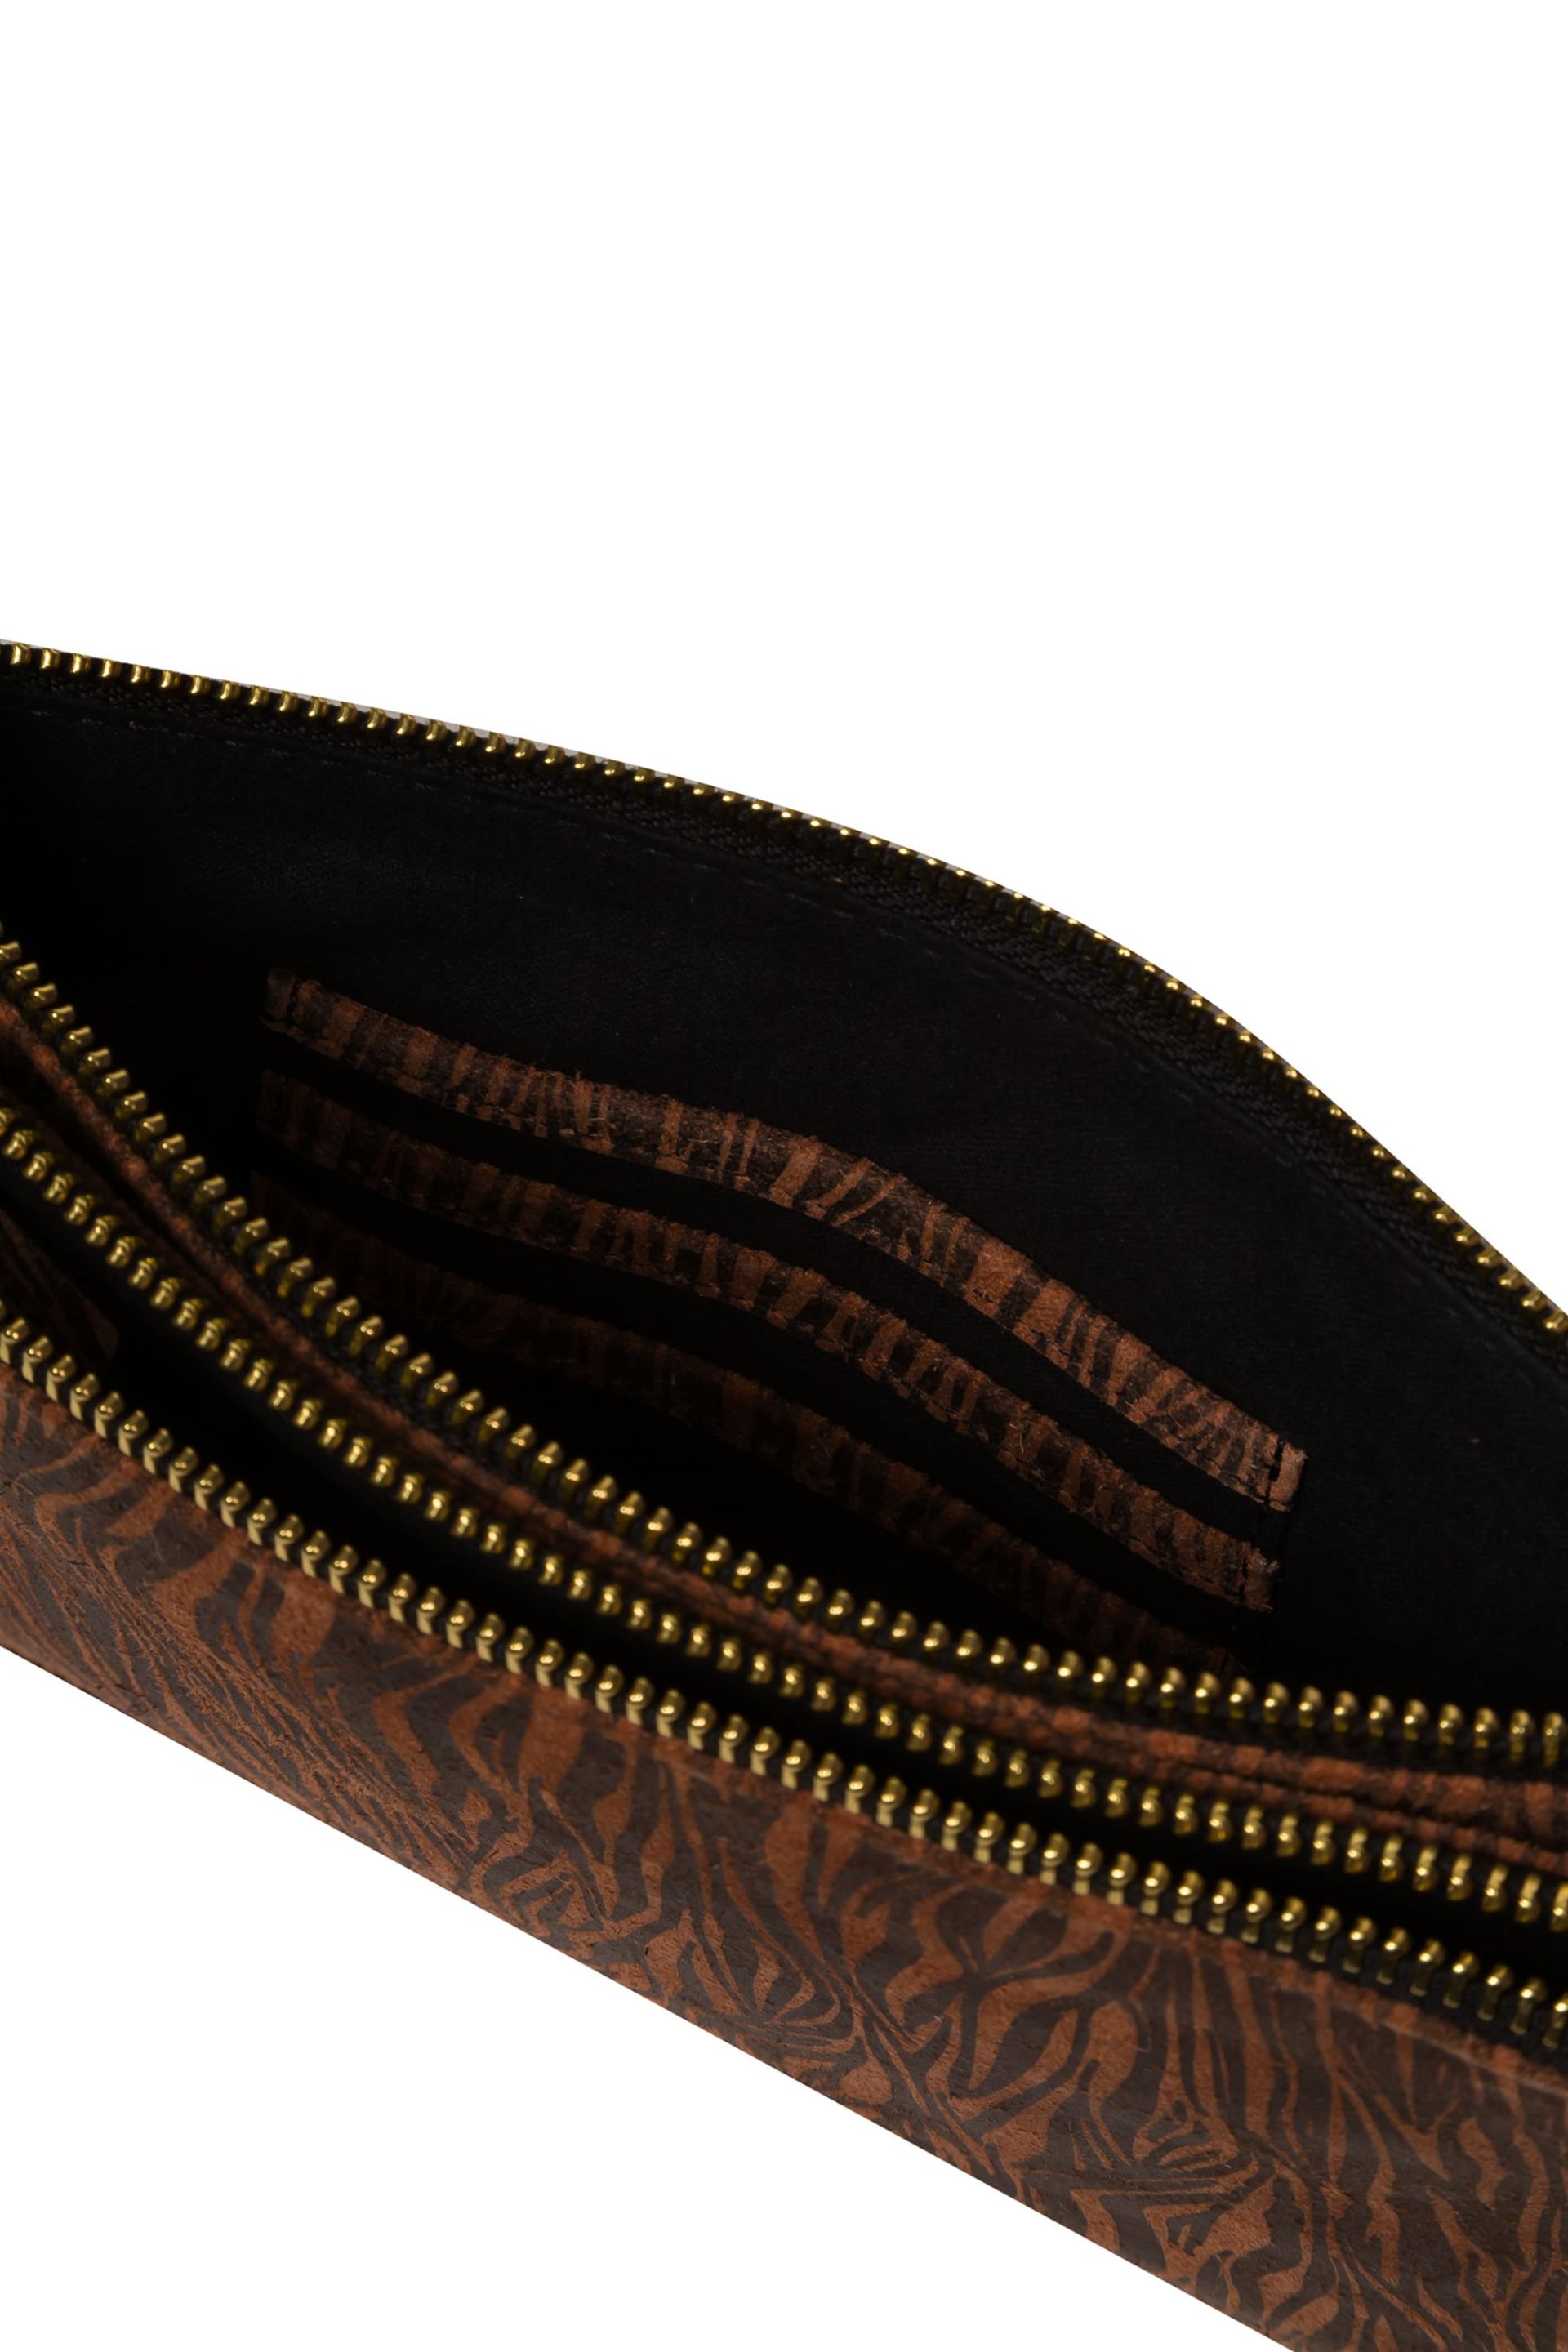 Pure Luxuries London Addison Nappa Leather Clutch Bag - Image 6 of 6